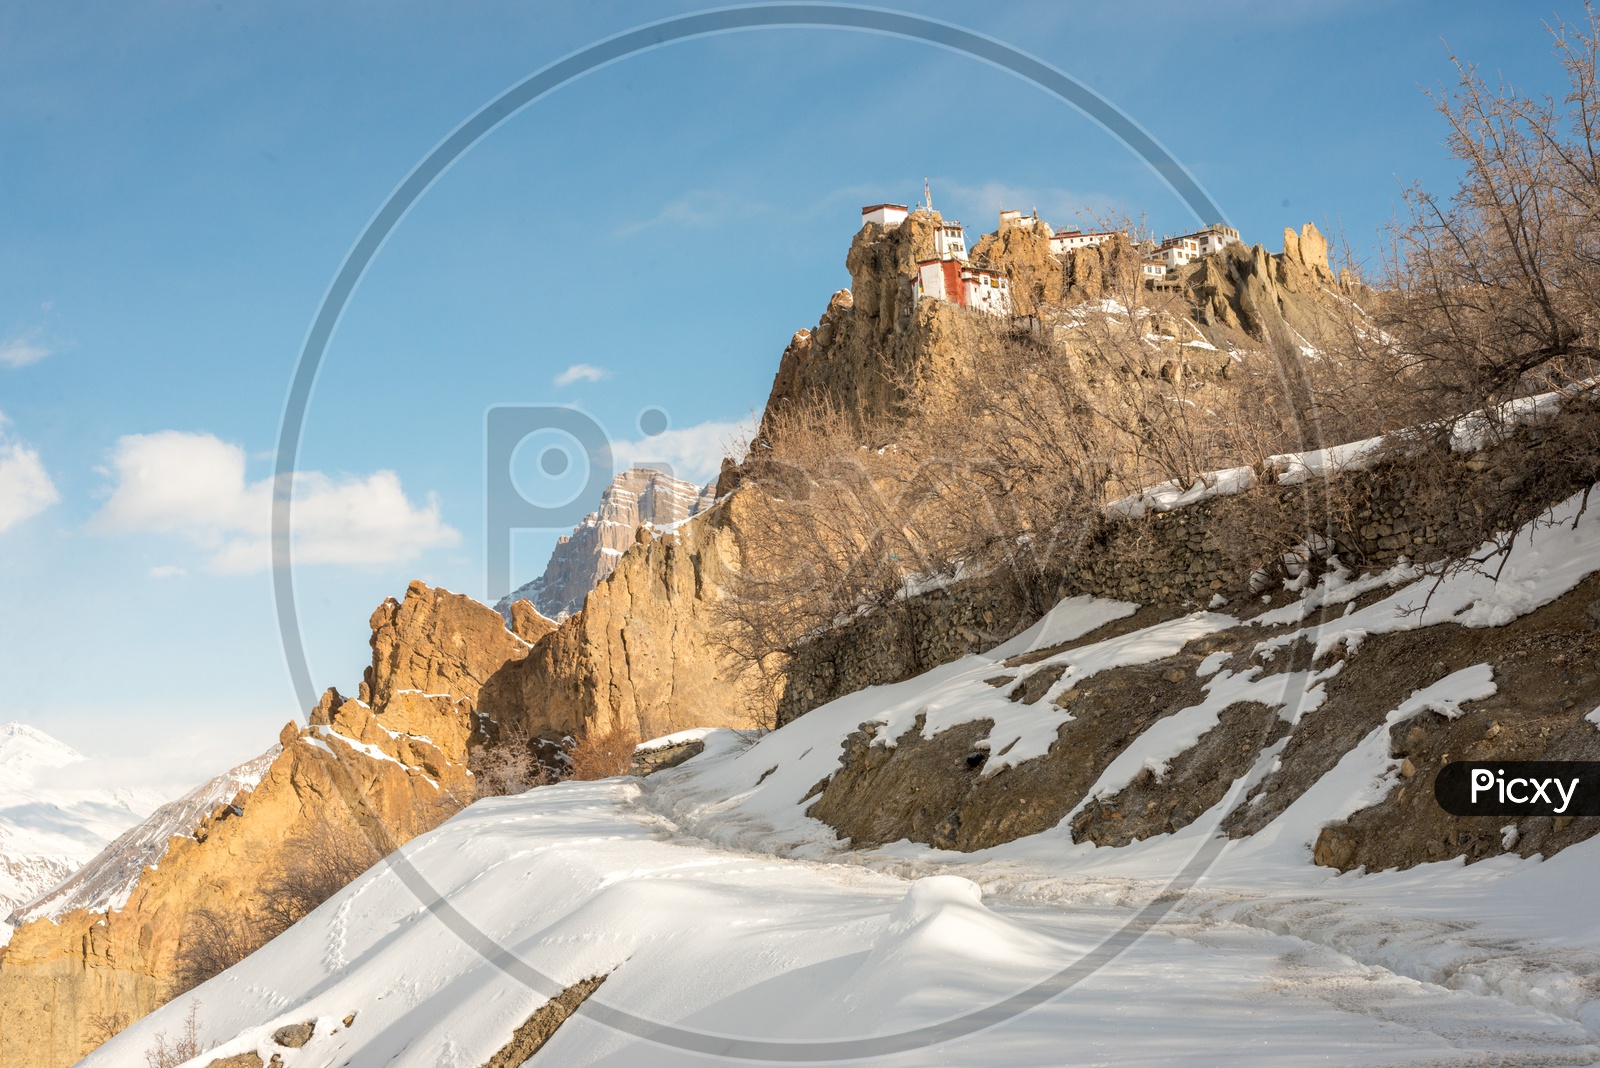 Dhankar Monastery on Mountain in Snow with Clouds in Sky